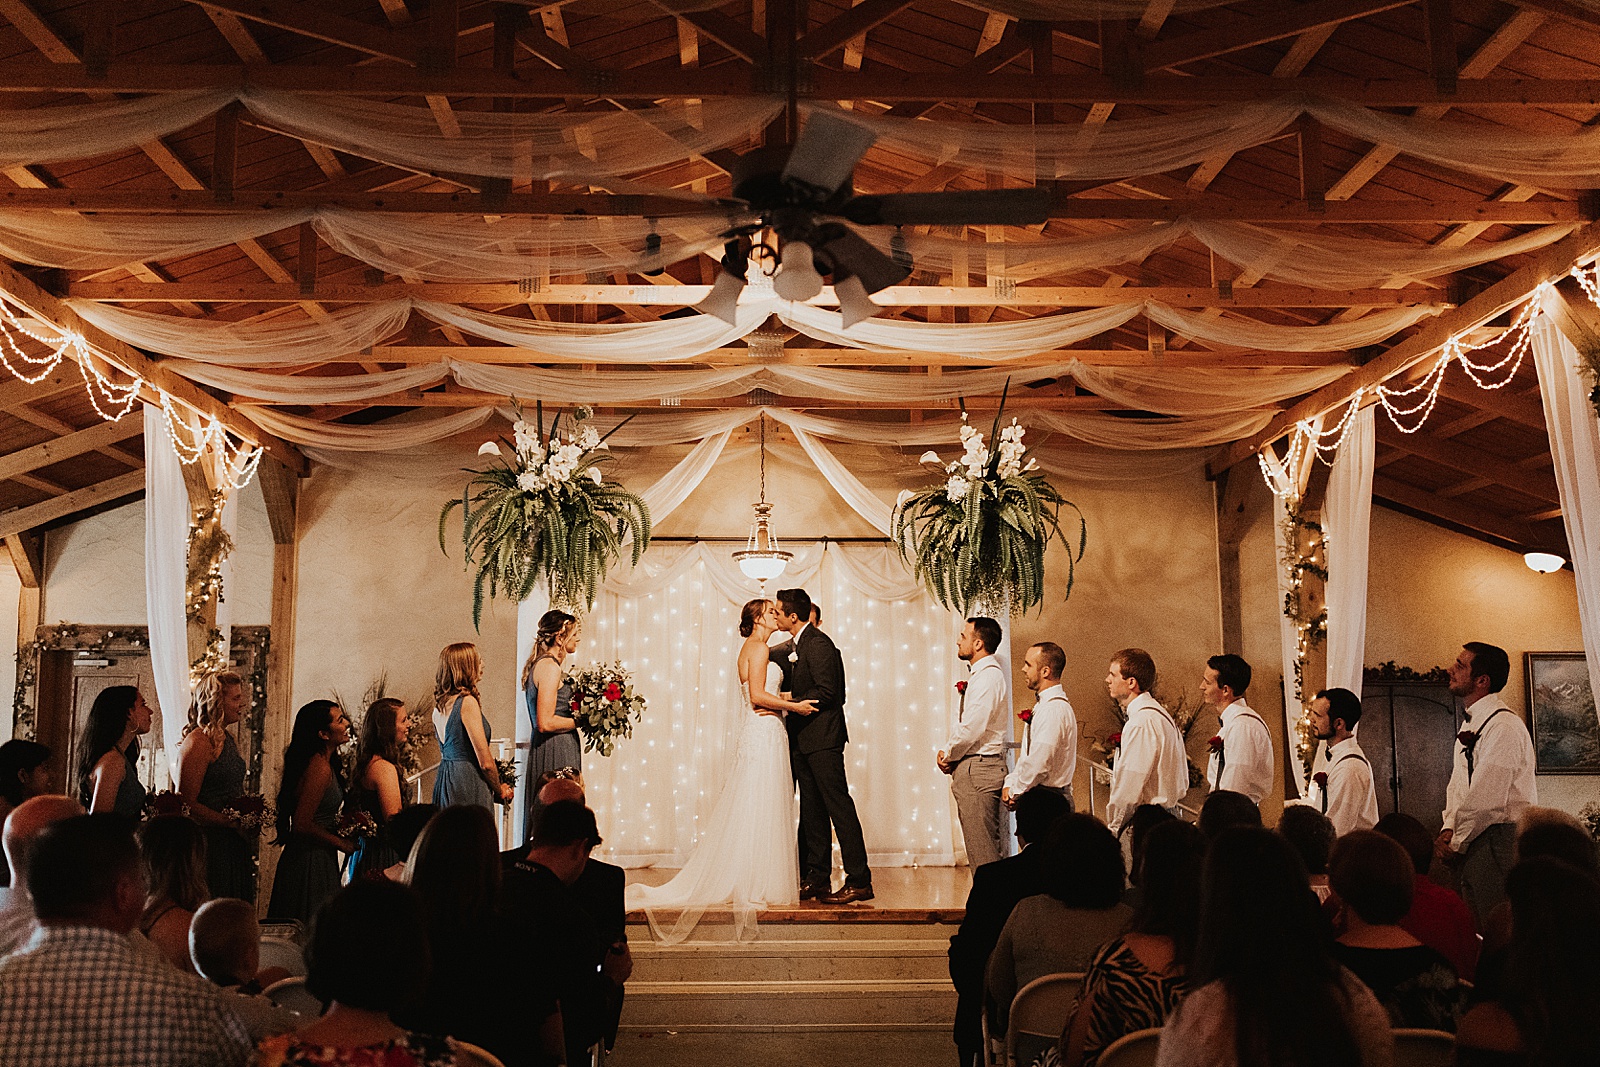 A ceremony photo at Country Home Weddings in Canyon, TX.